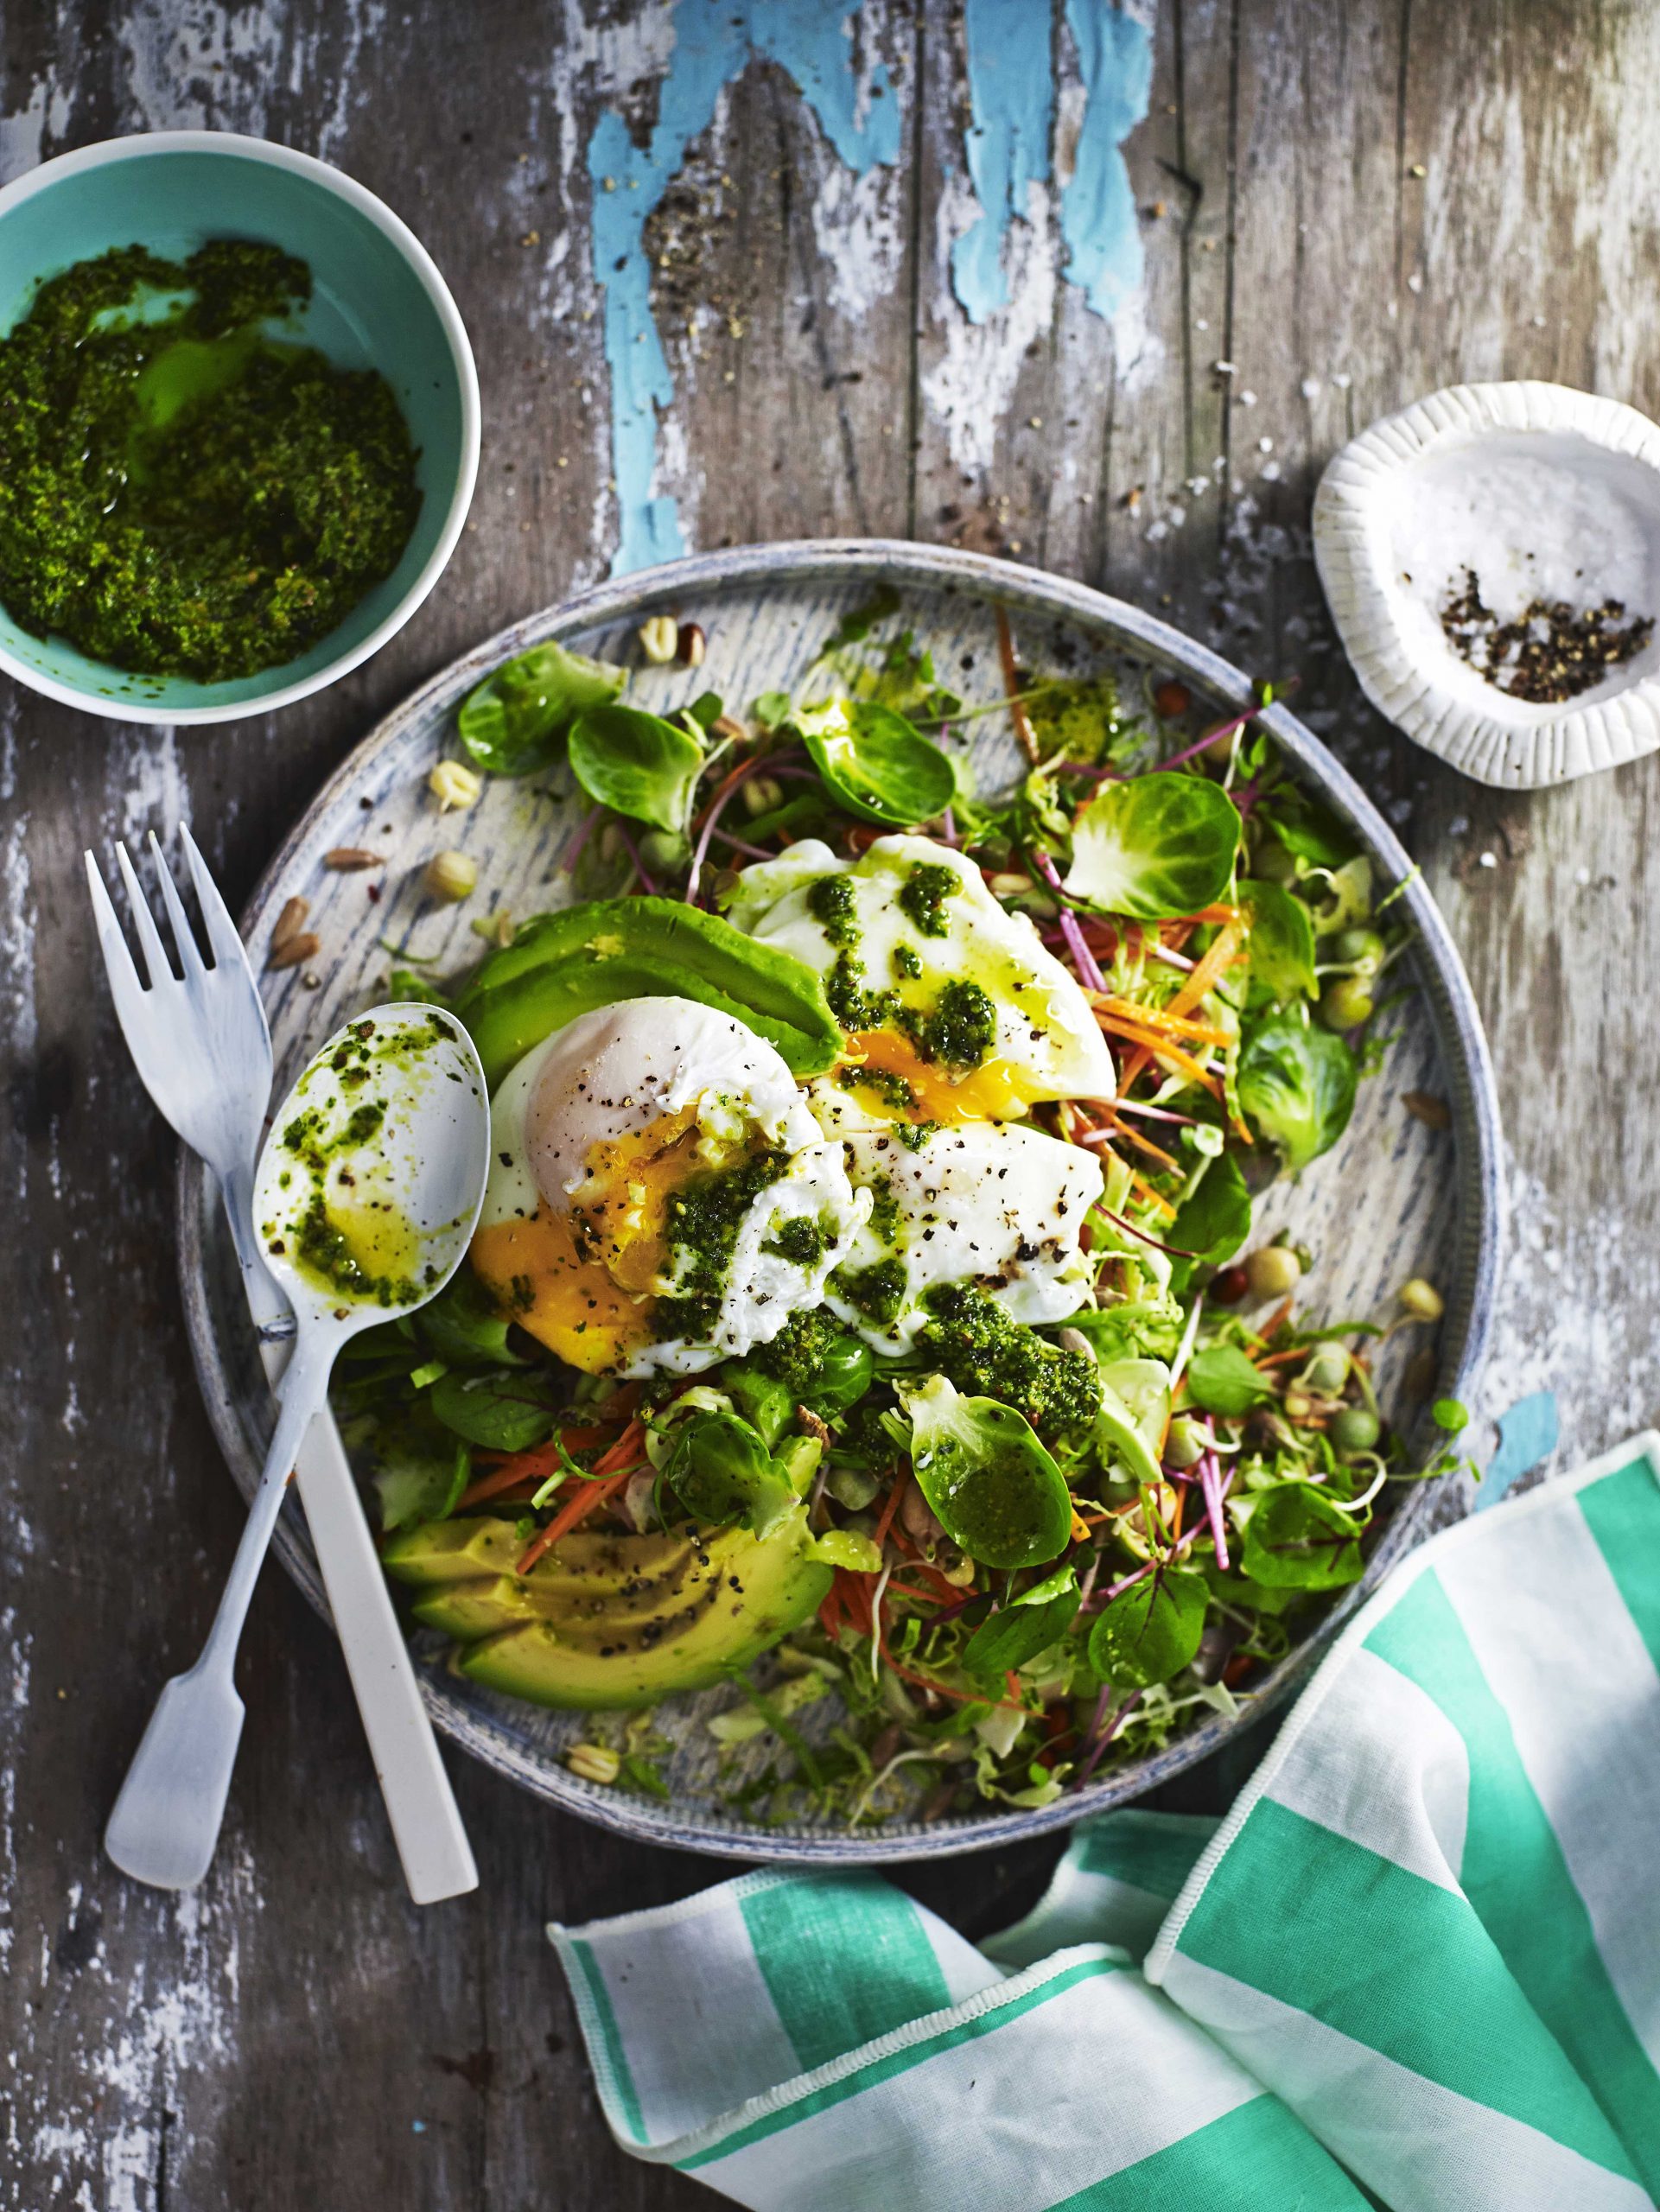 Breakfast salad with poached eggs & kale pesto